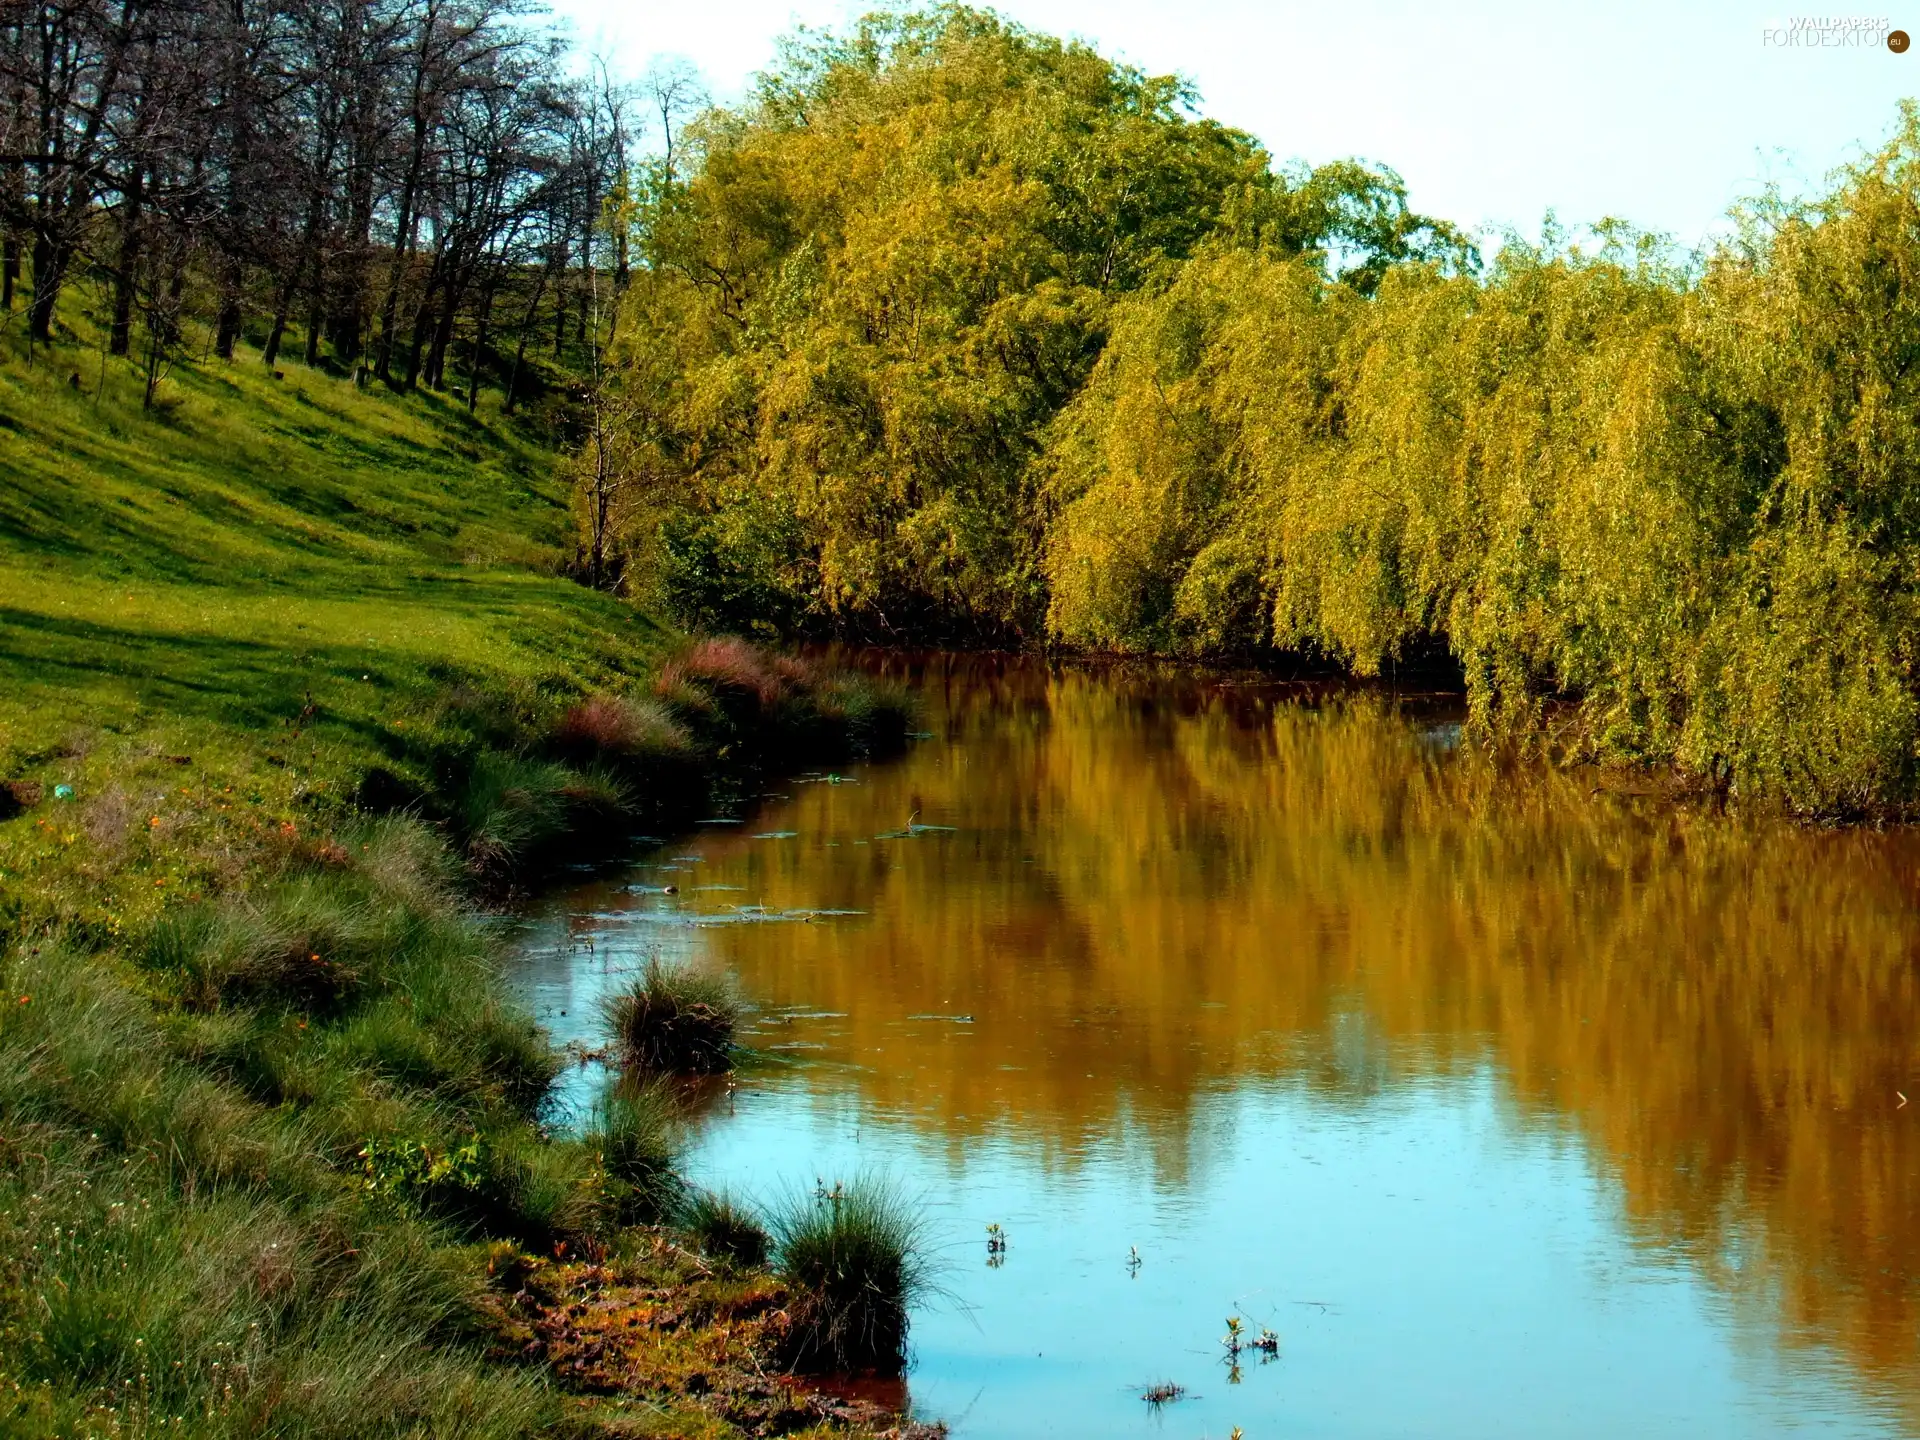 River, viewes, grass, trees